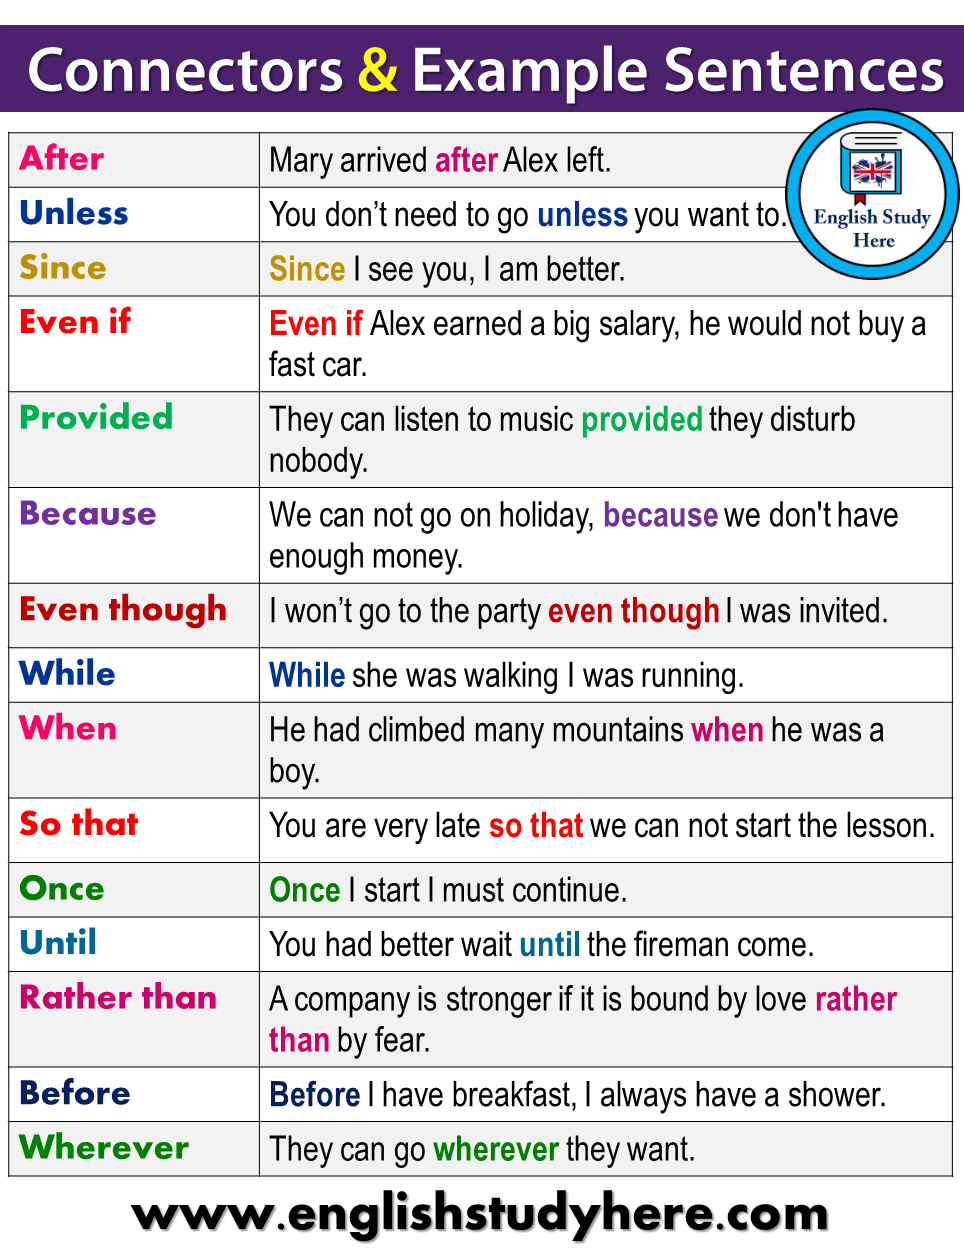 English Connectors and Example Sentences